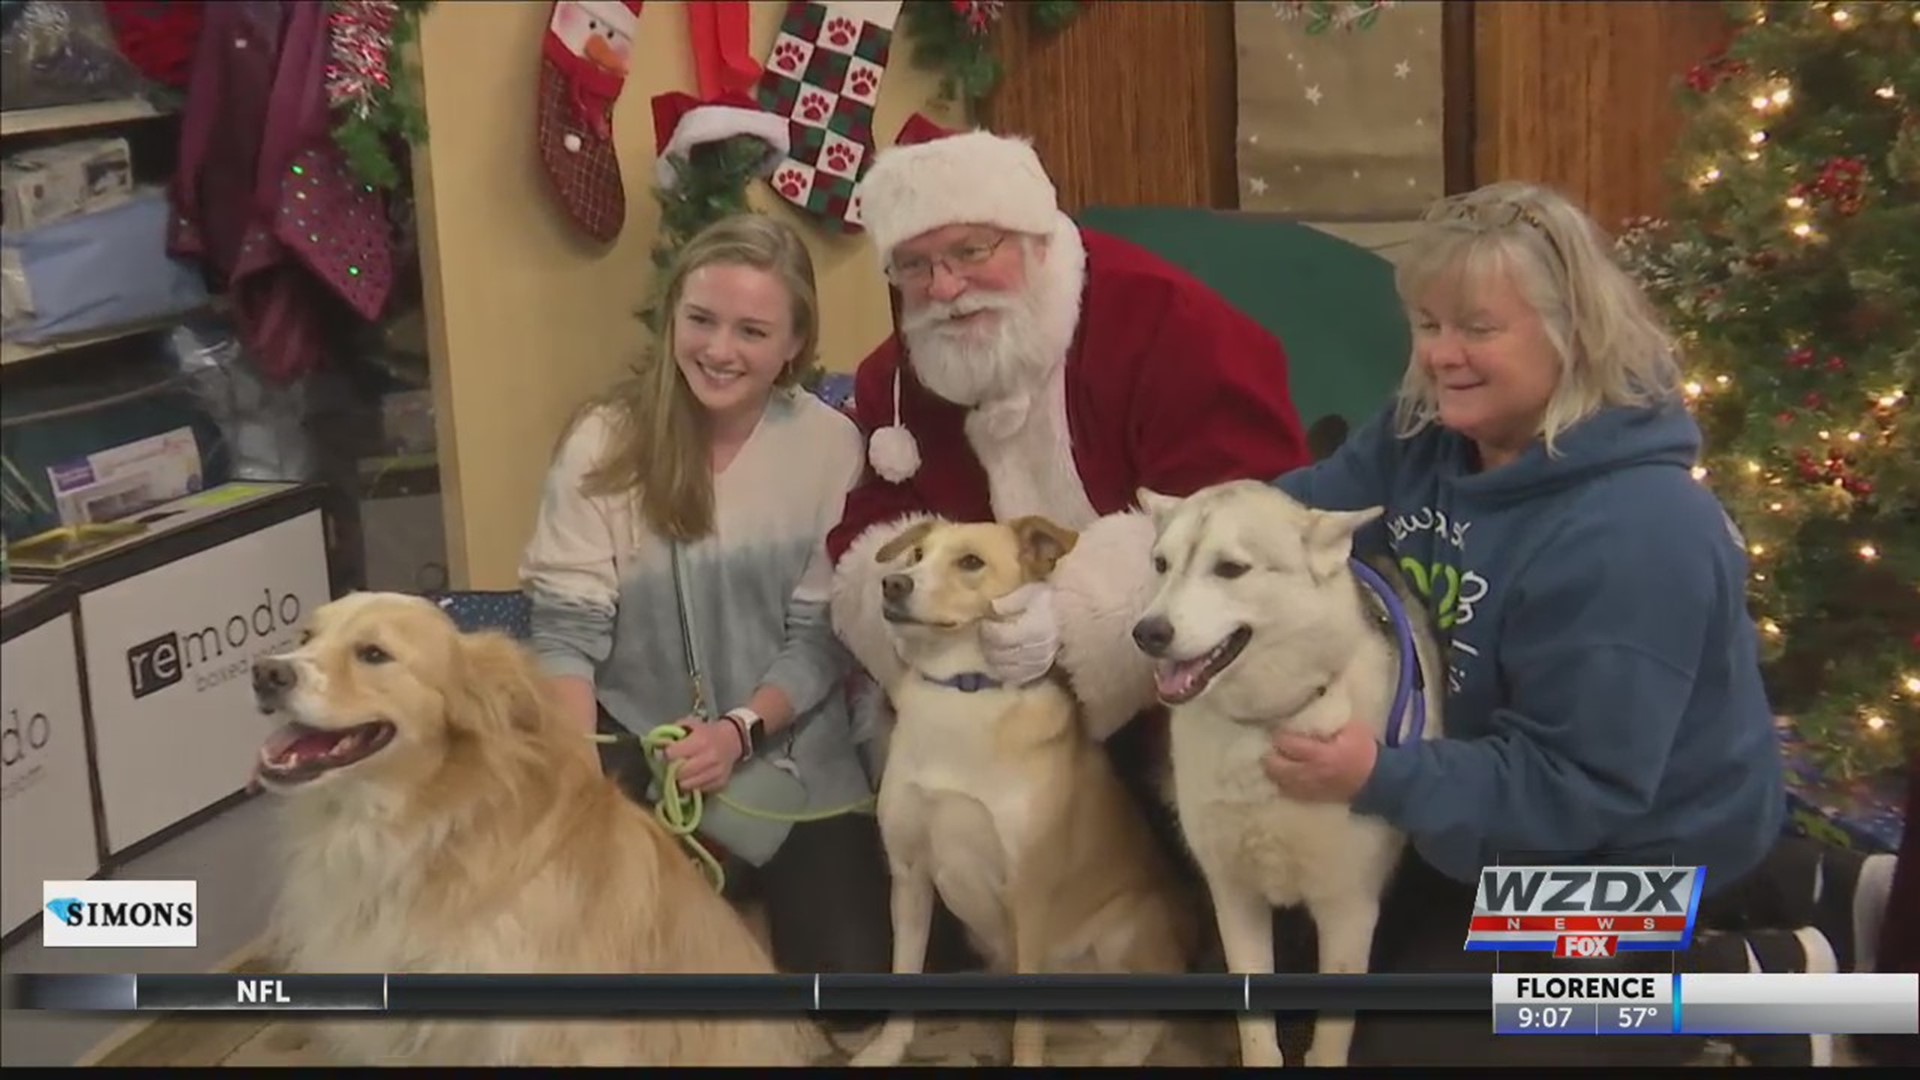 Locals brought their pets out to pose with Santa for a holiday picture, and it was just about the cutest thing you can think of.